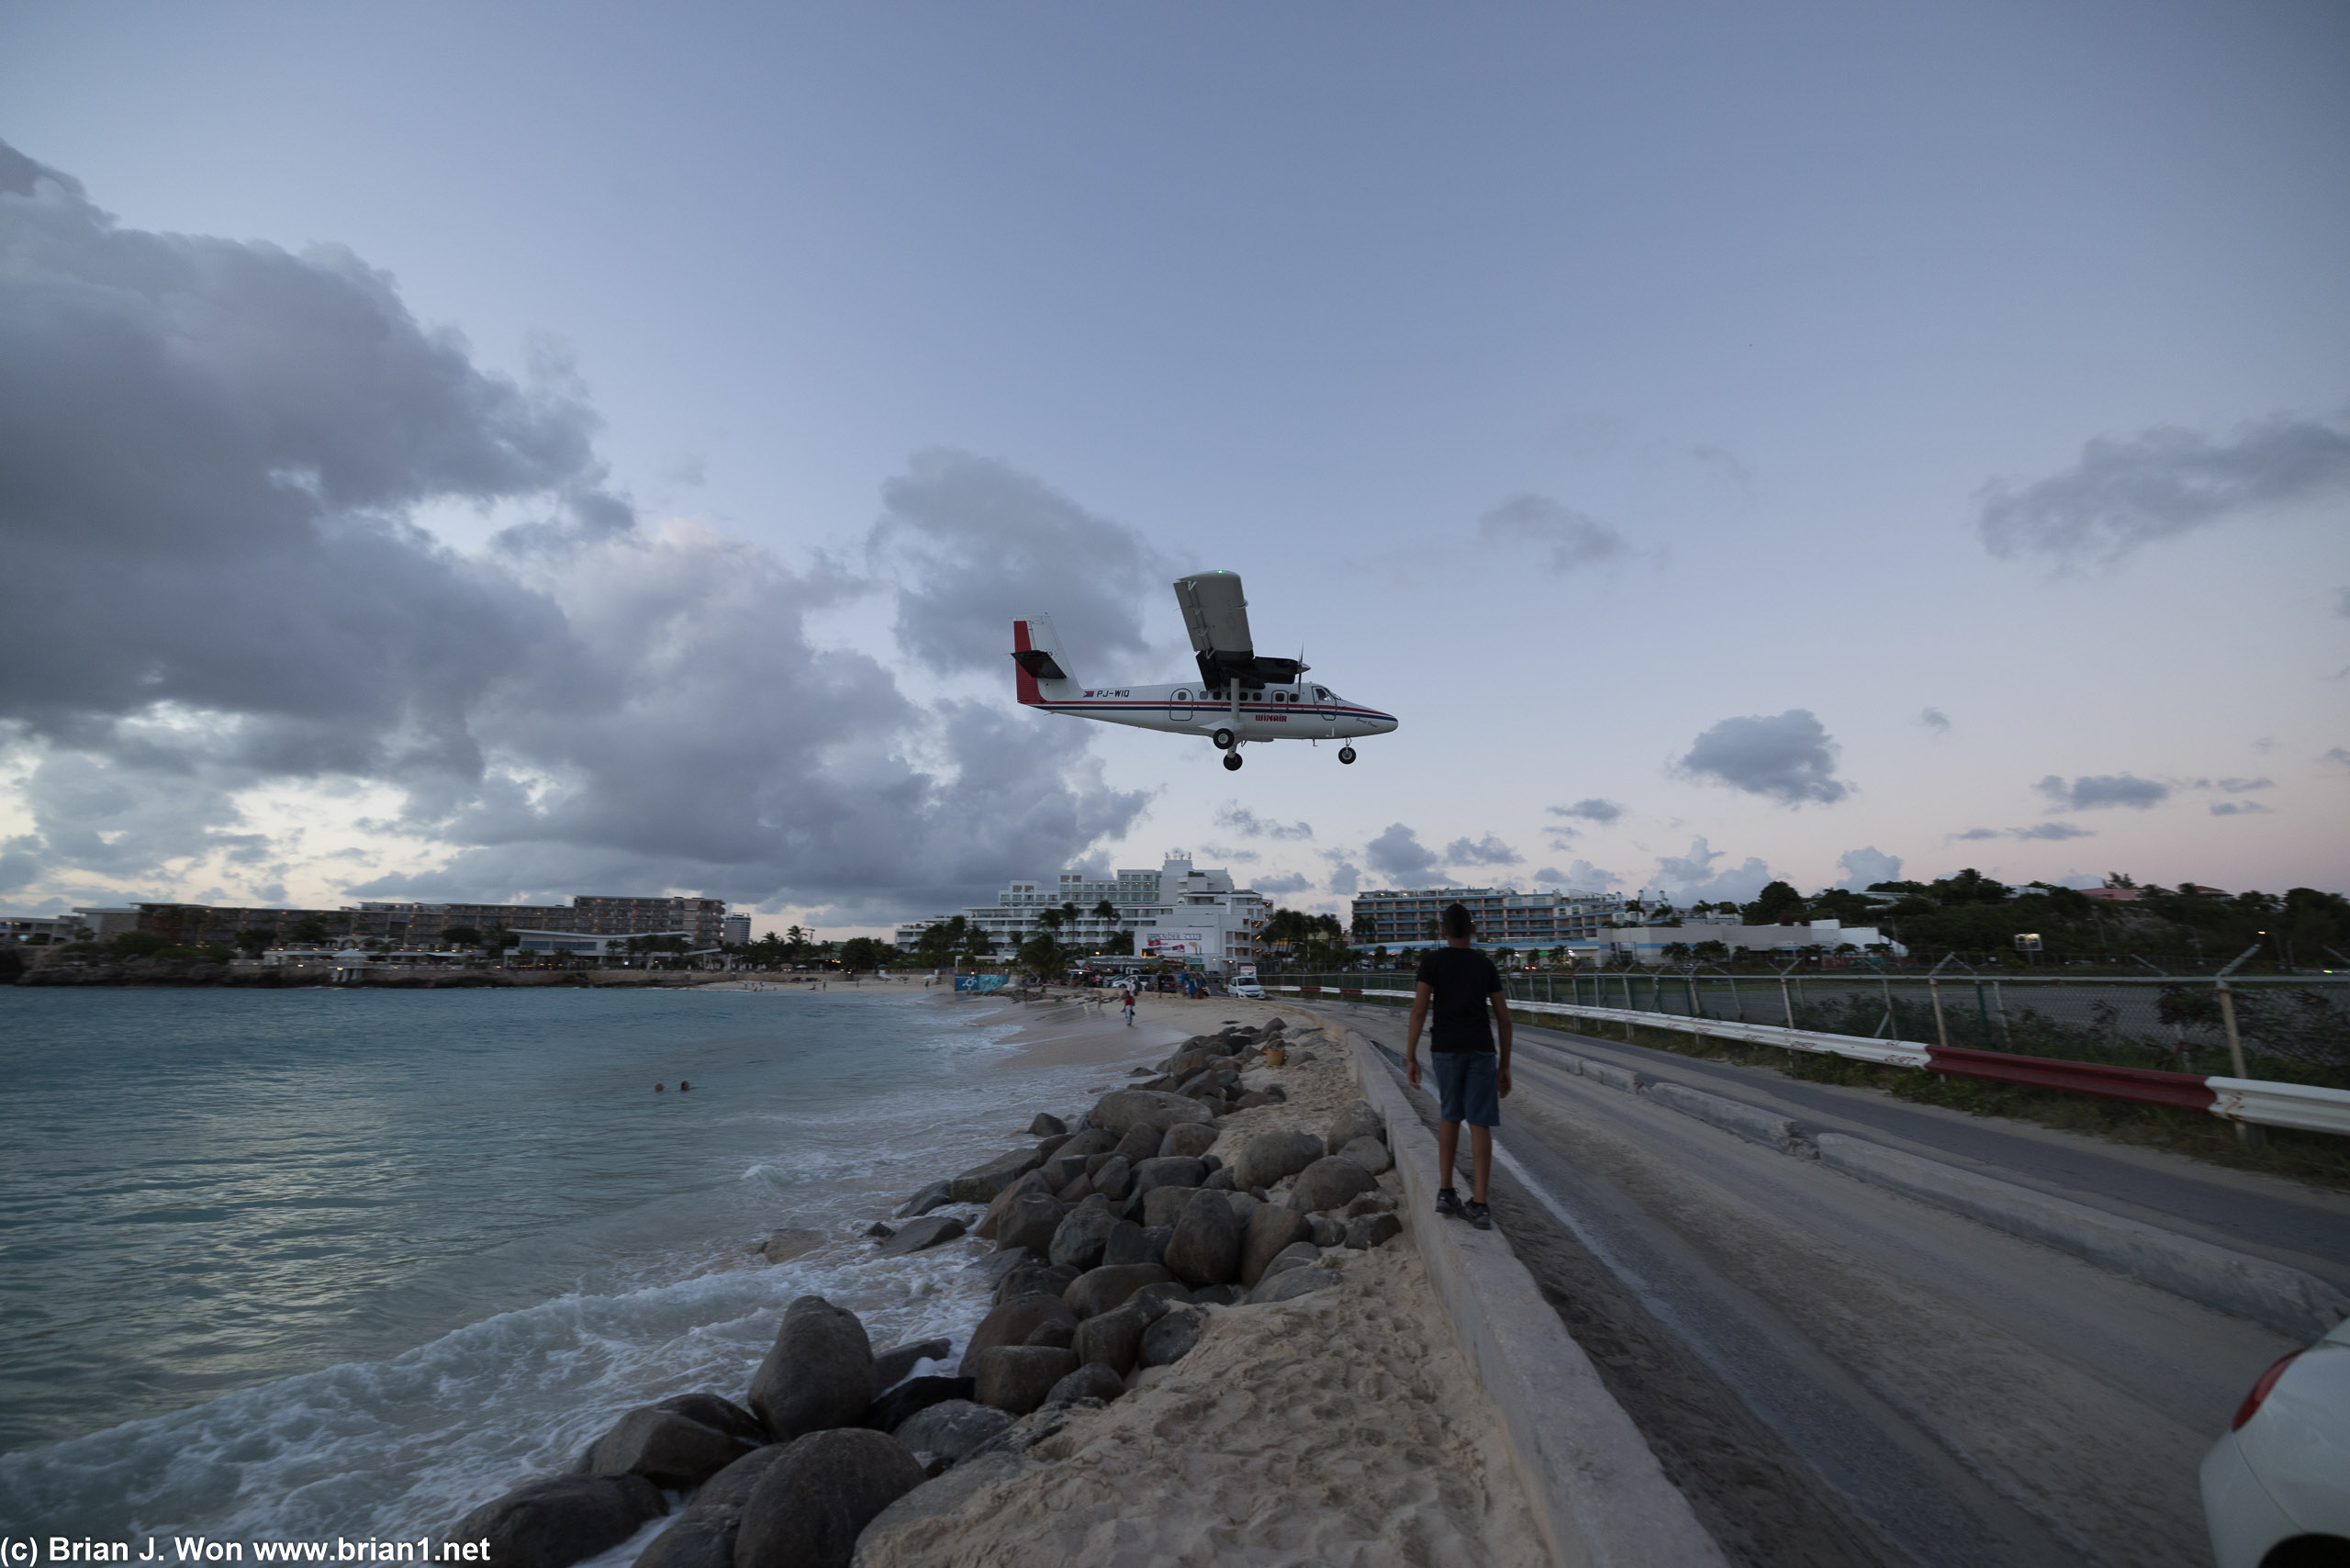 Winair DHC-6-300 on final approach, as viewed from the famous Maho Beach.